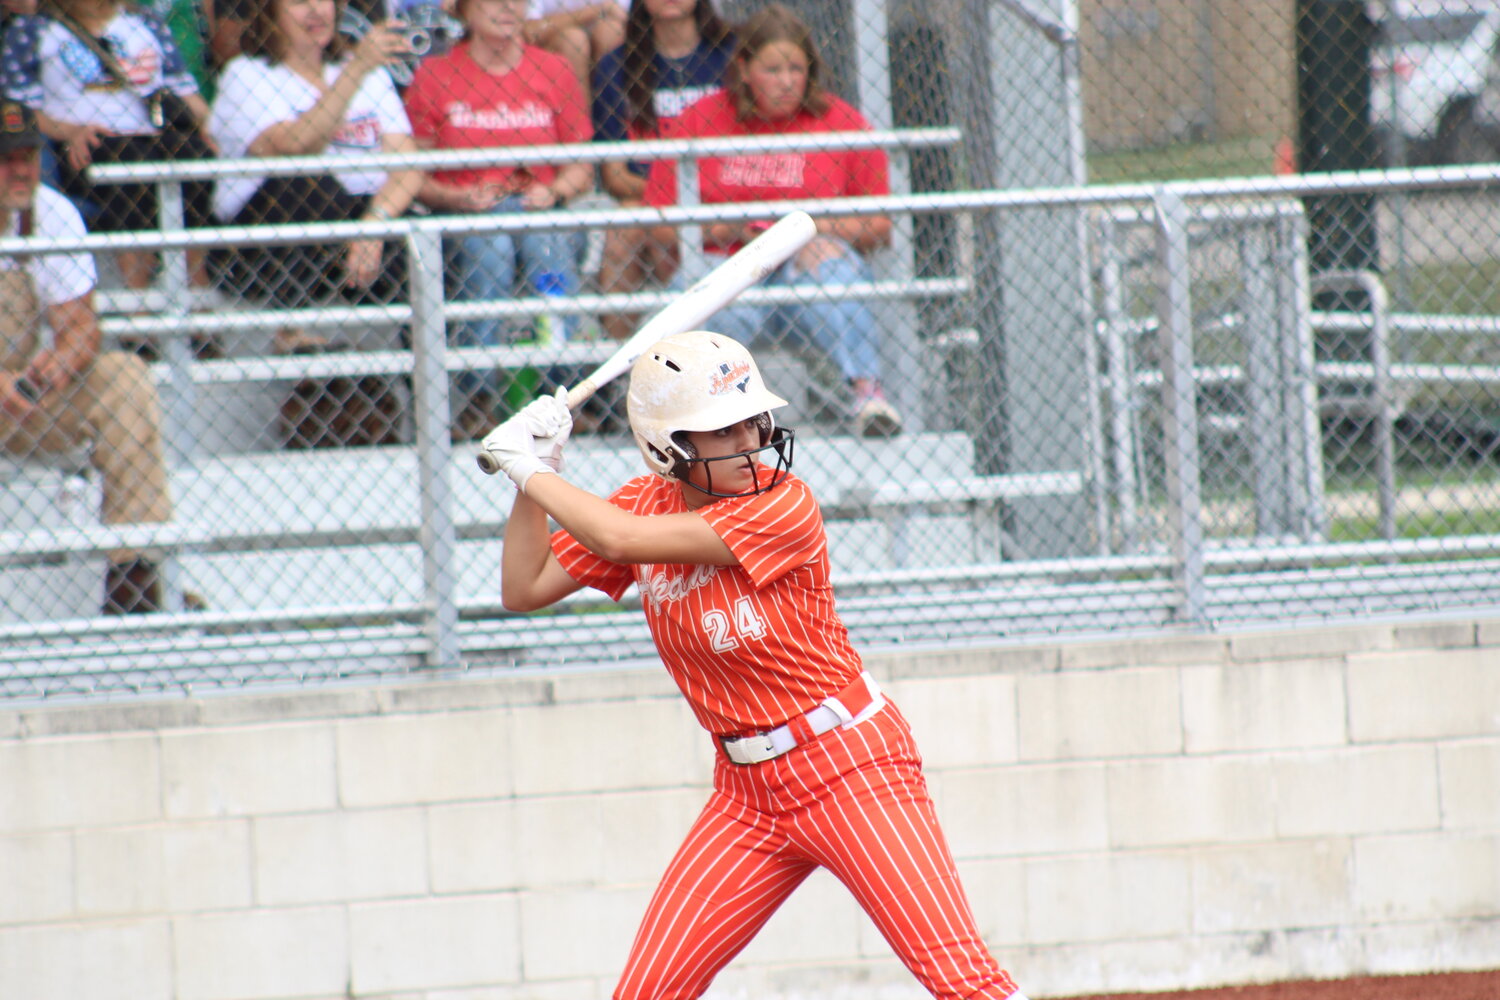 Lady Apaches senior outfielder Kelly 
Breitschopf (24) at bat for Gonzales in game two in the Wimberley bi-district series